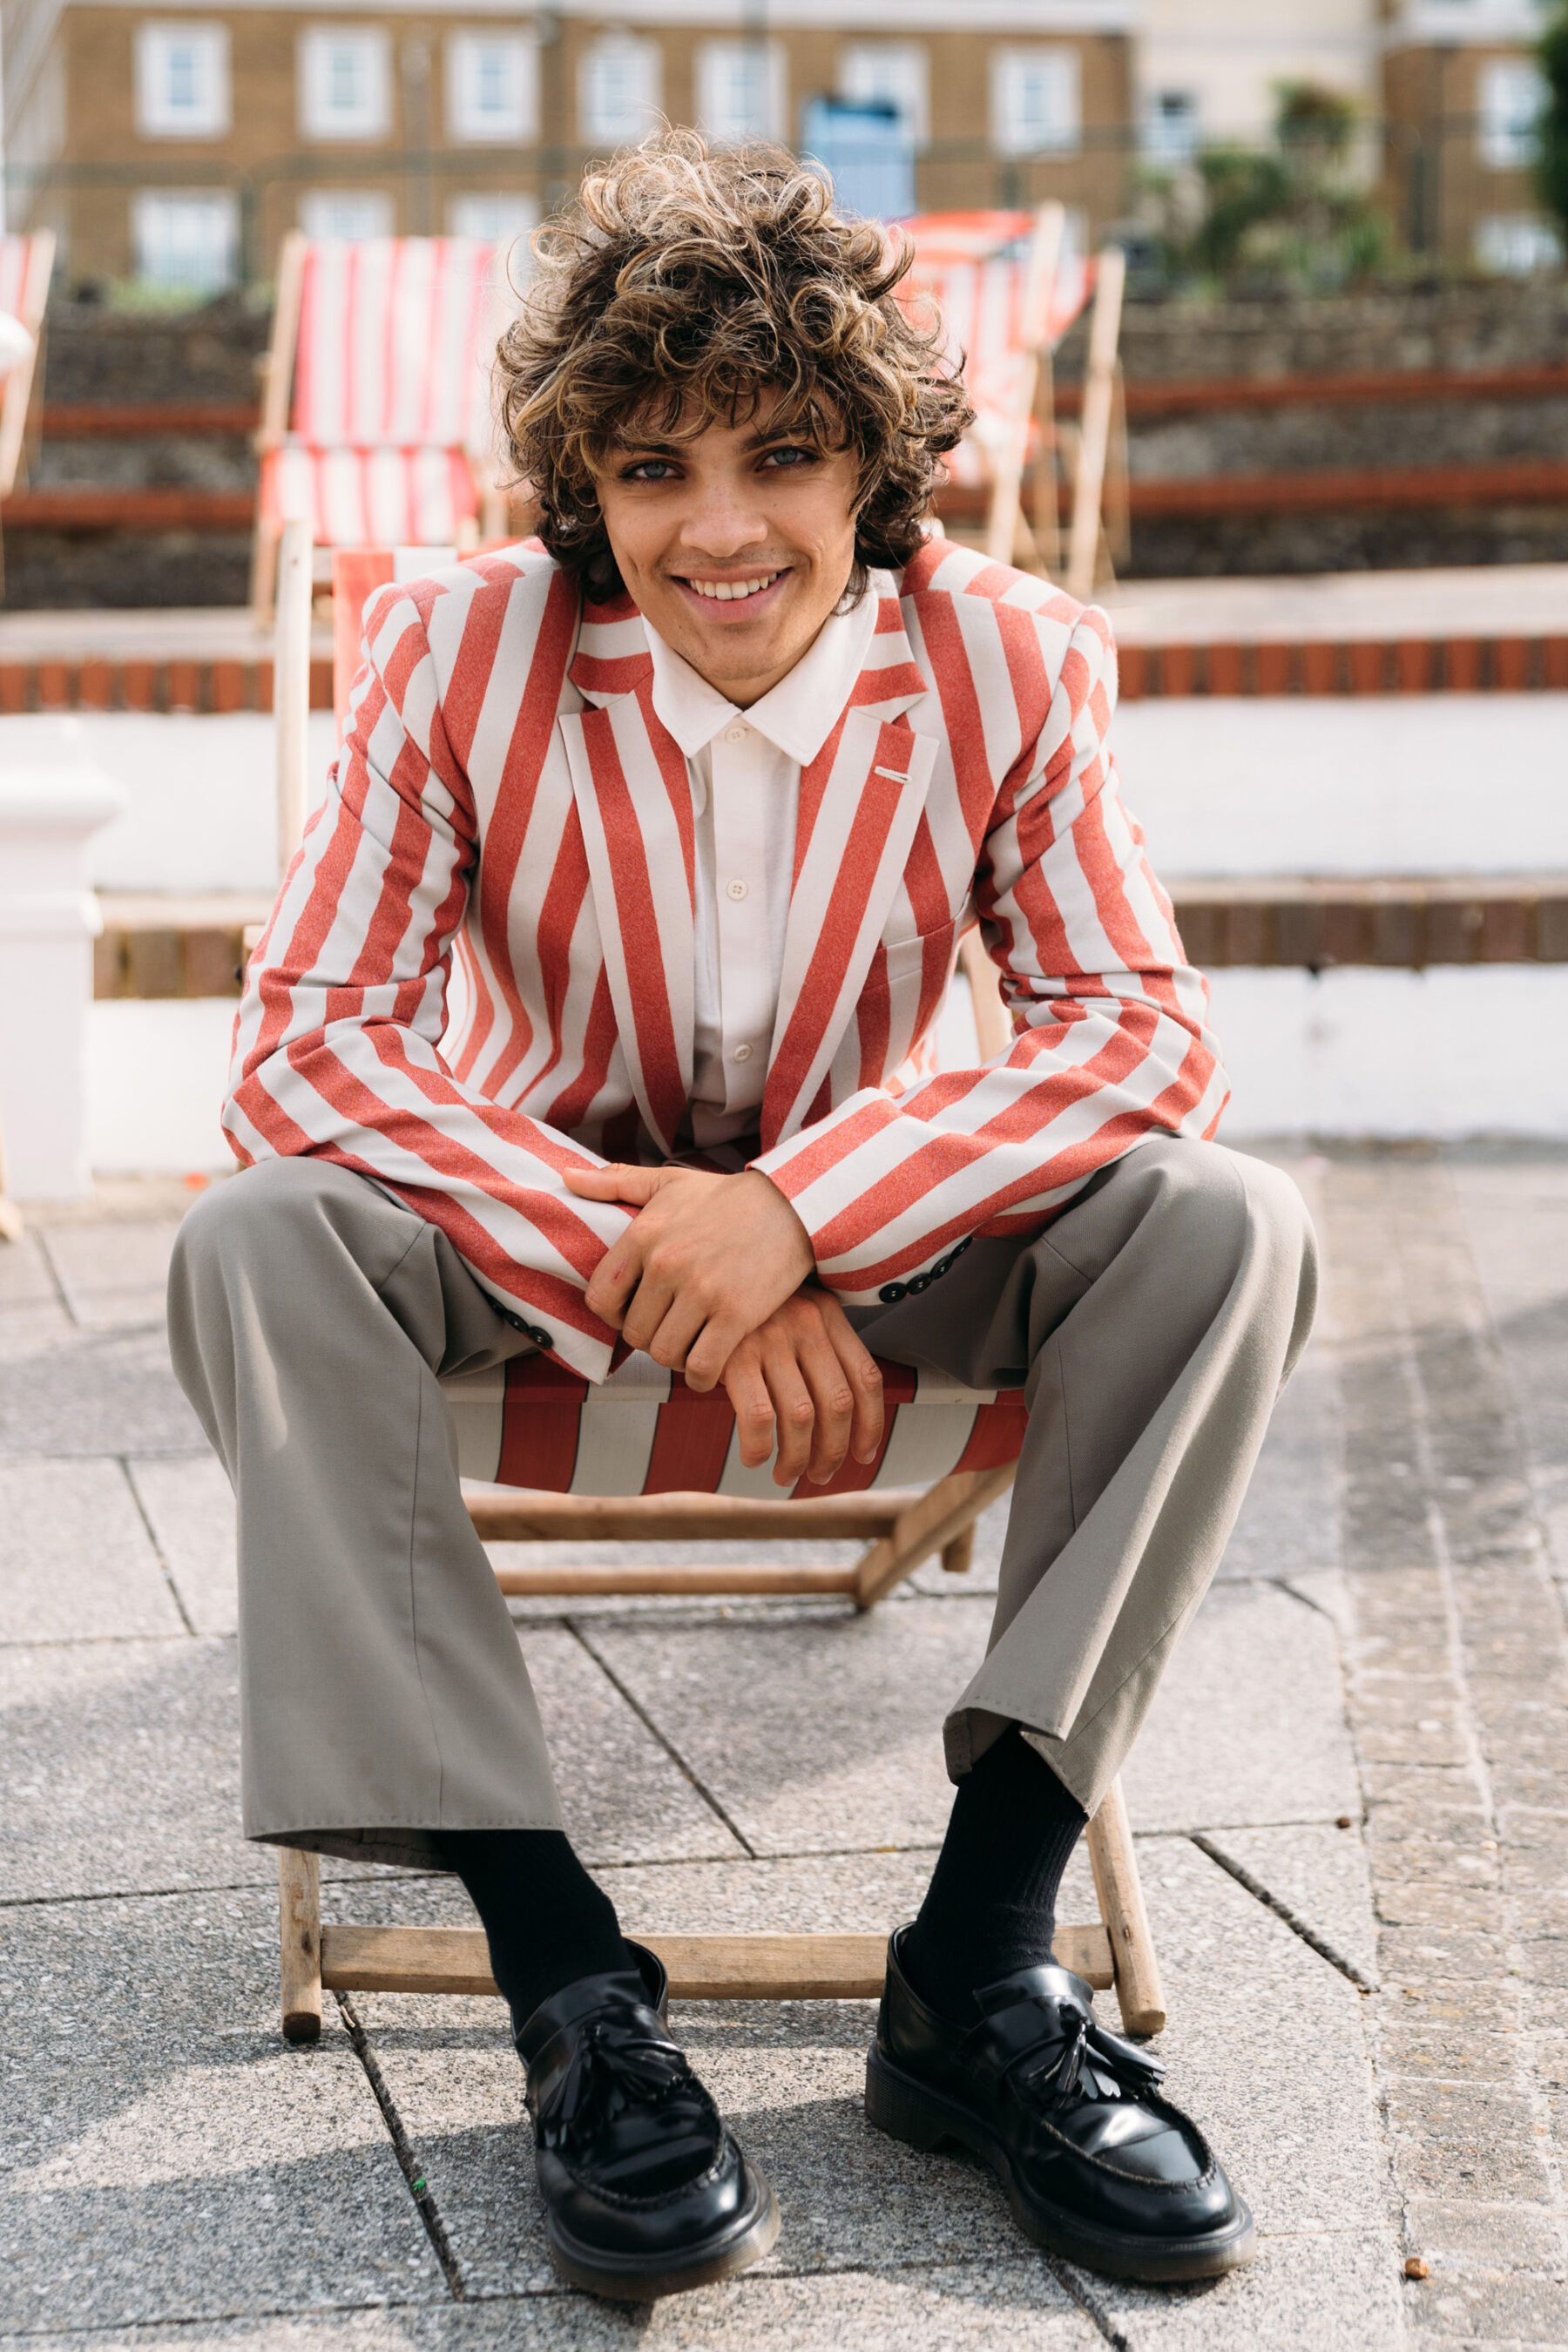 Groom in red and white stripy jacket. Joanna Bongard Photography.